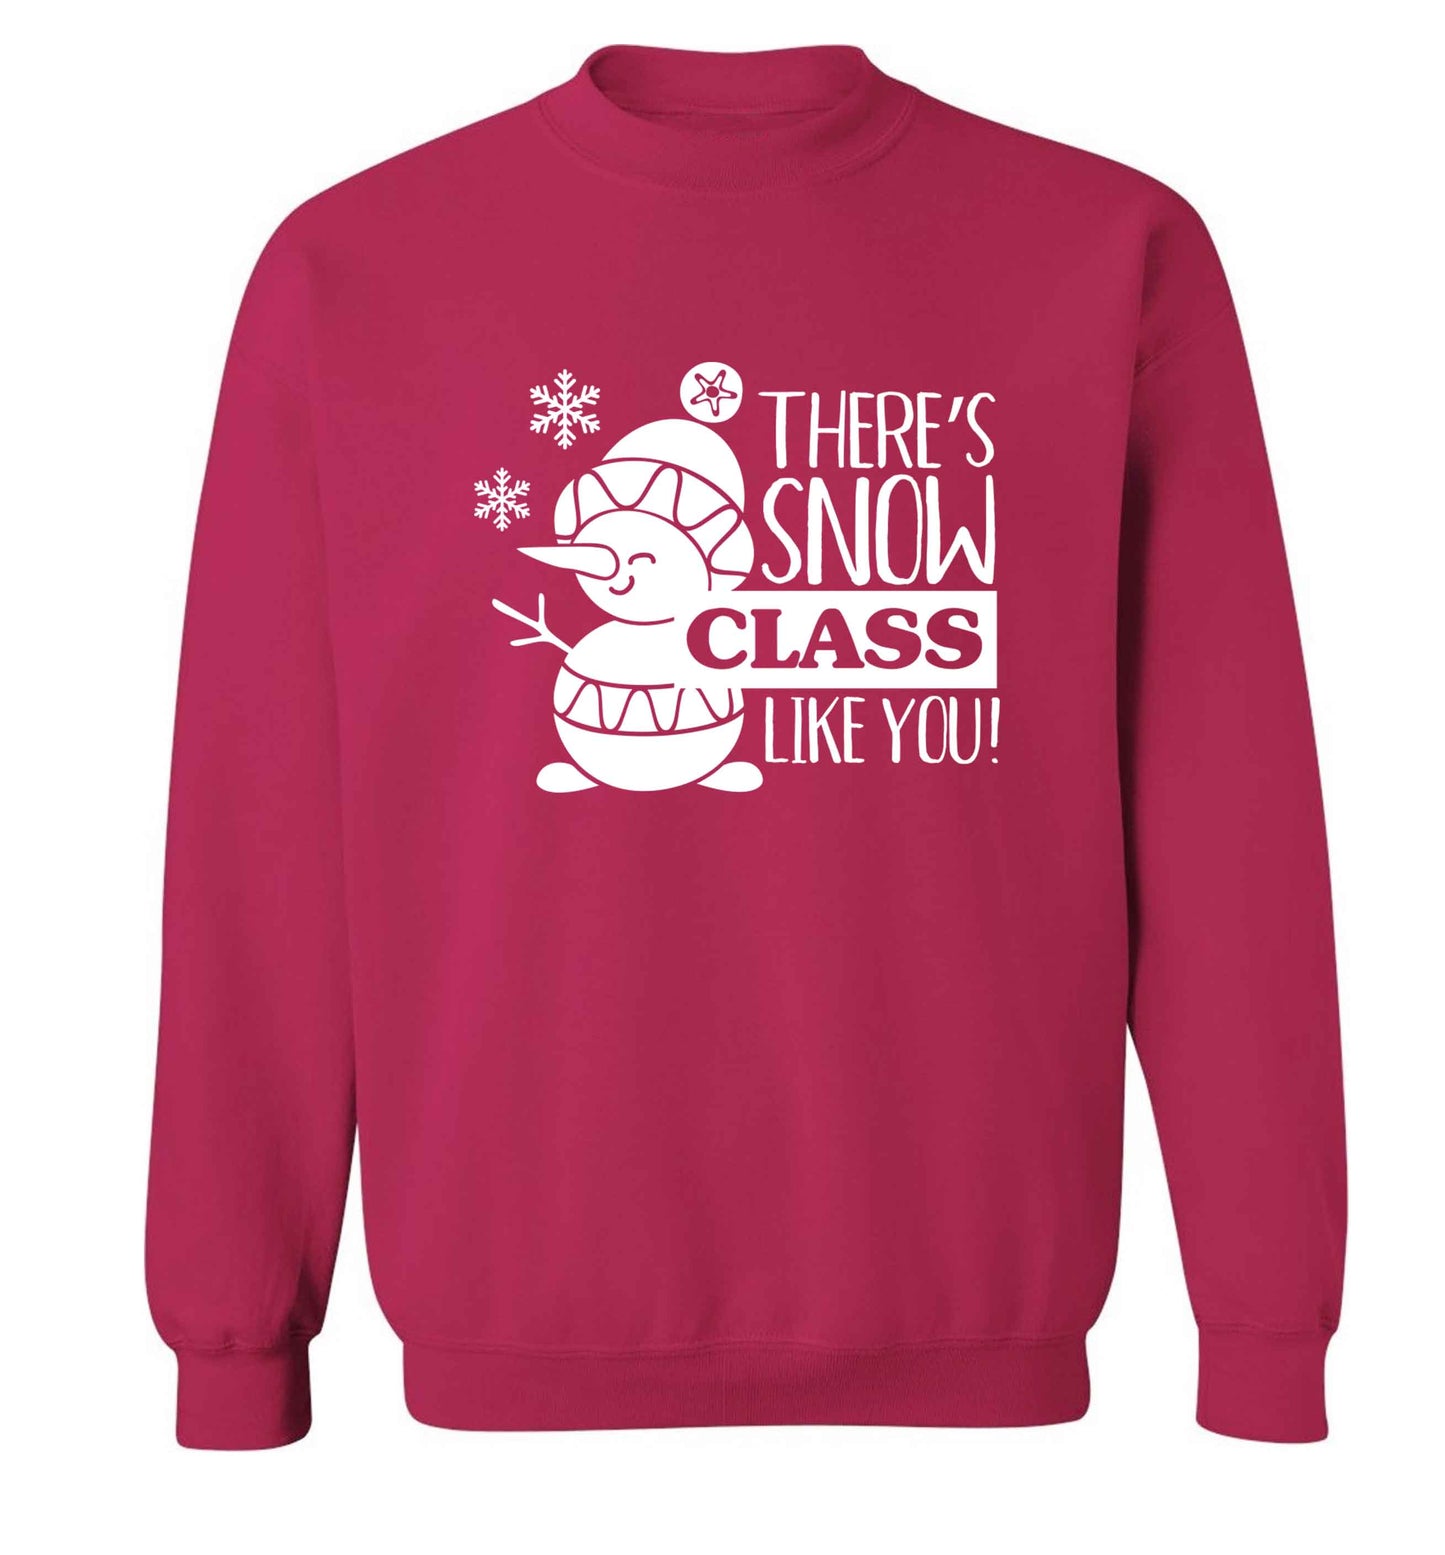 There's snow class like you adult's unisex pink sweater 2XL